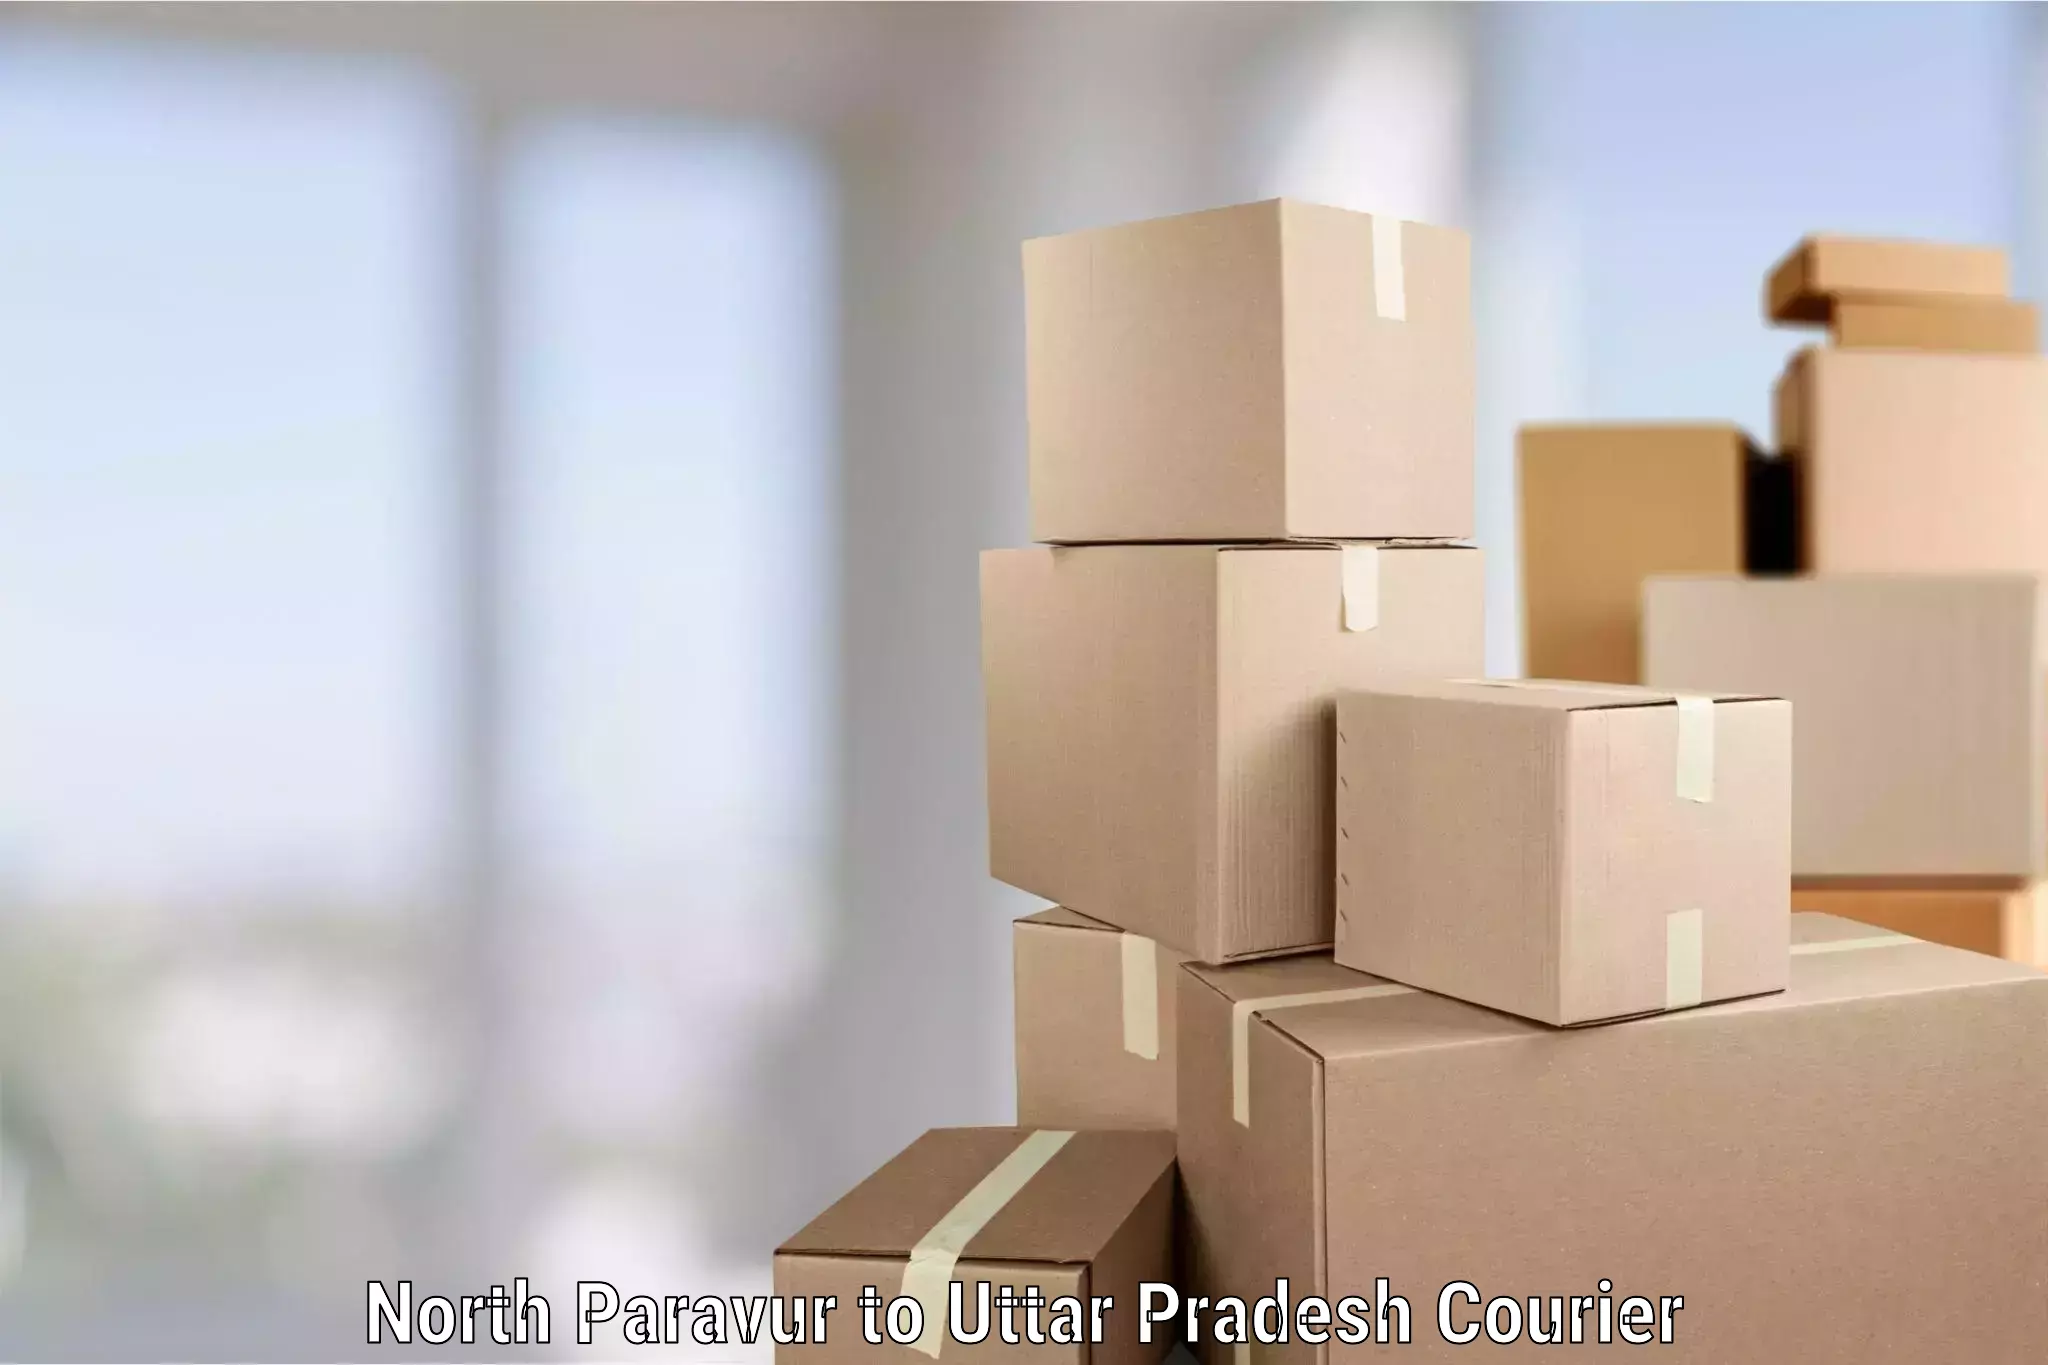 Full-service movers North Paravur to Vrindavan